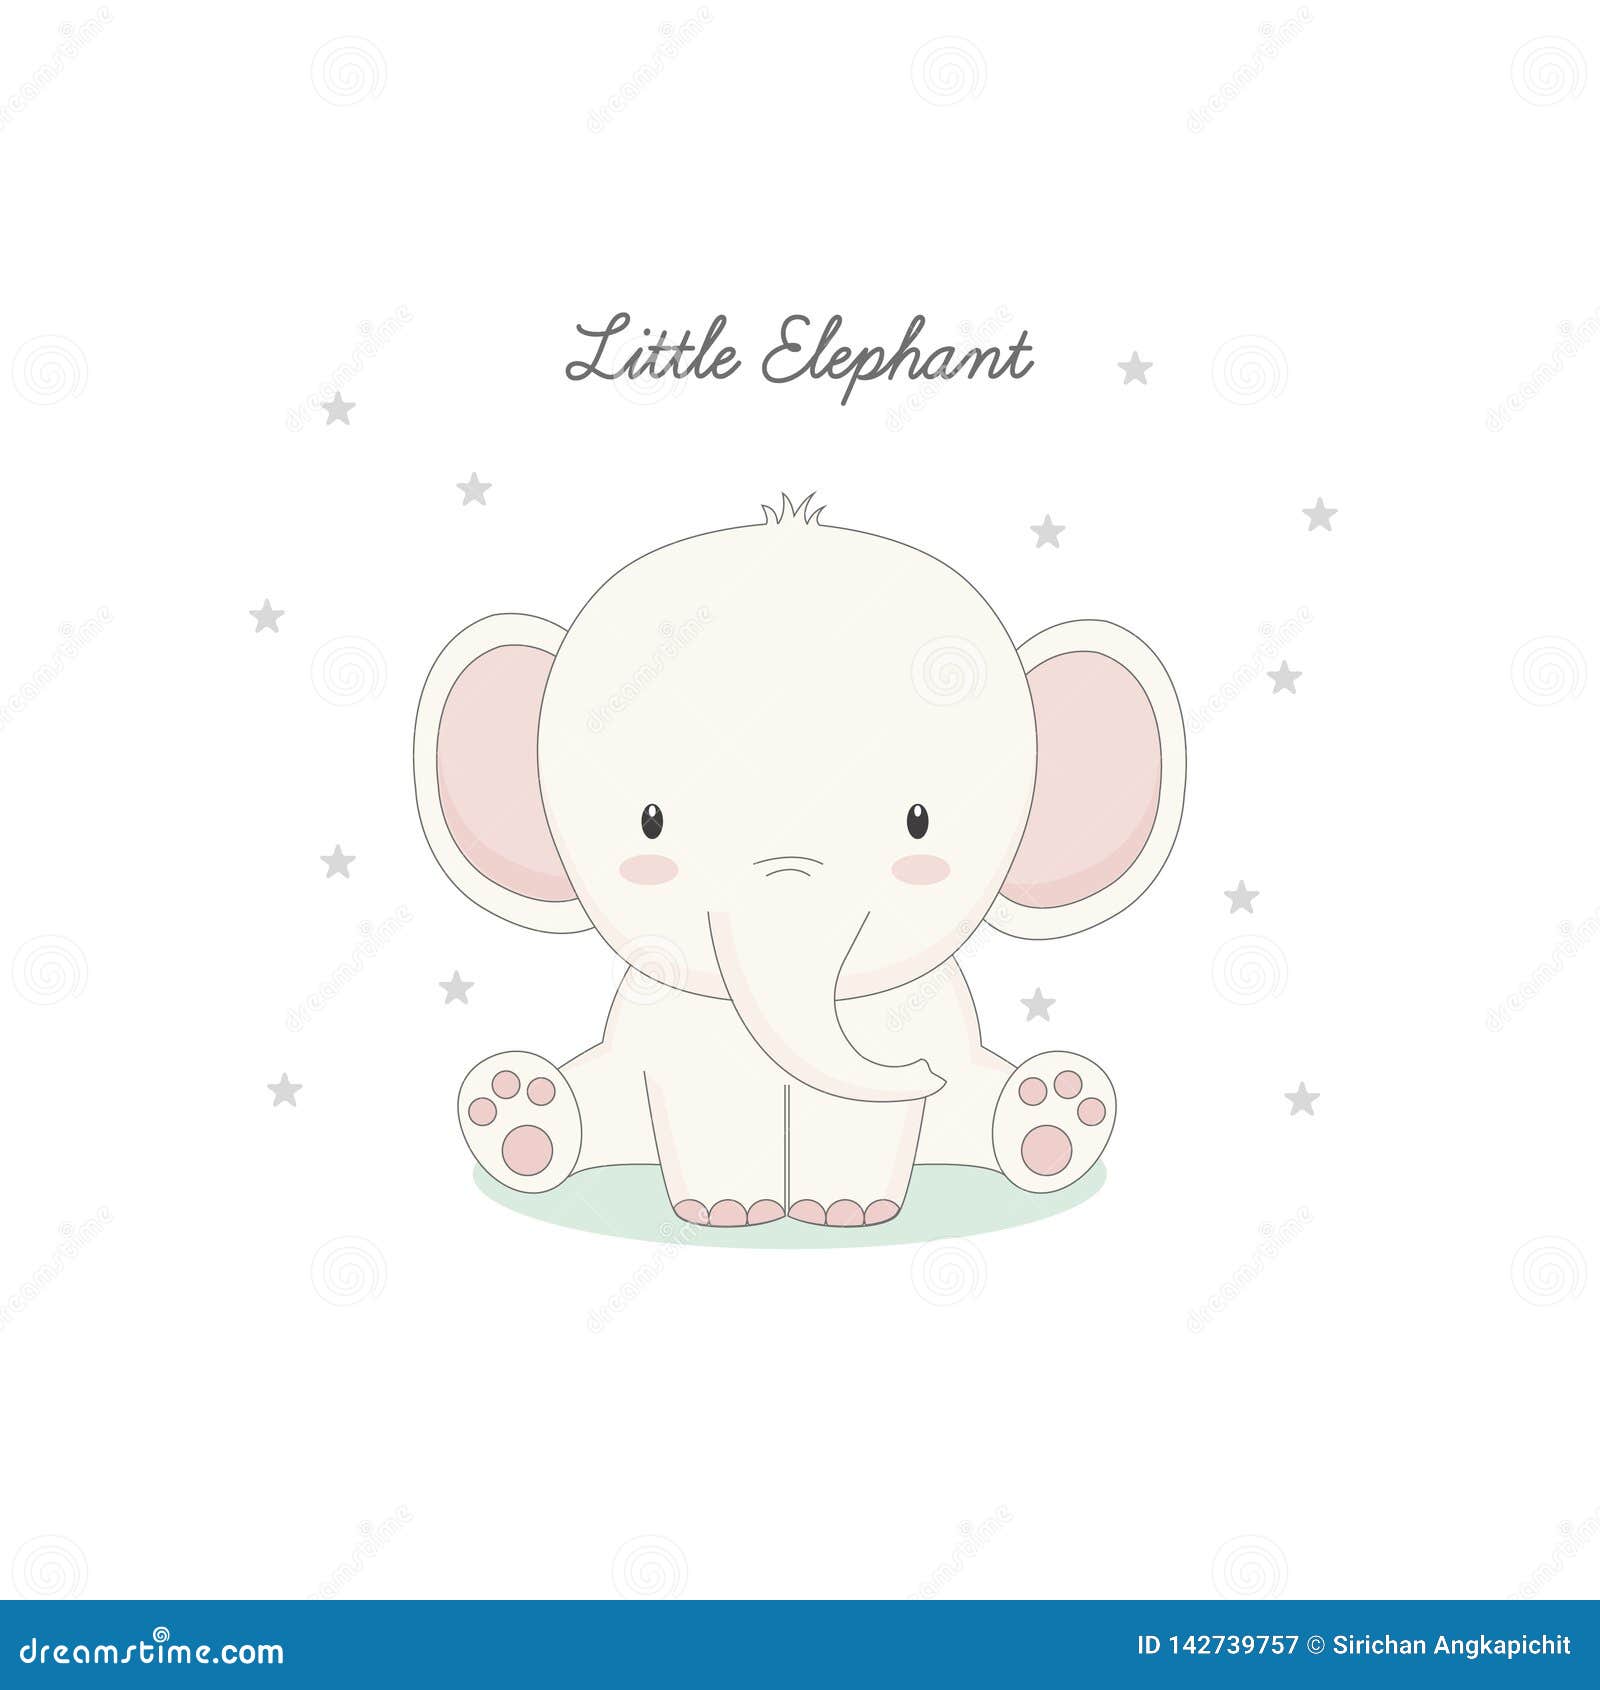 Download Vector Illustration Of A Cute Baby Elephant. Ilustracja ...